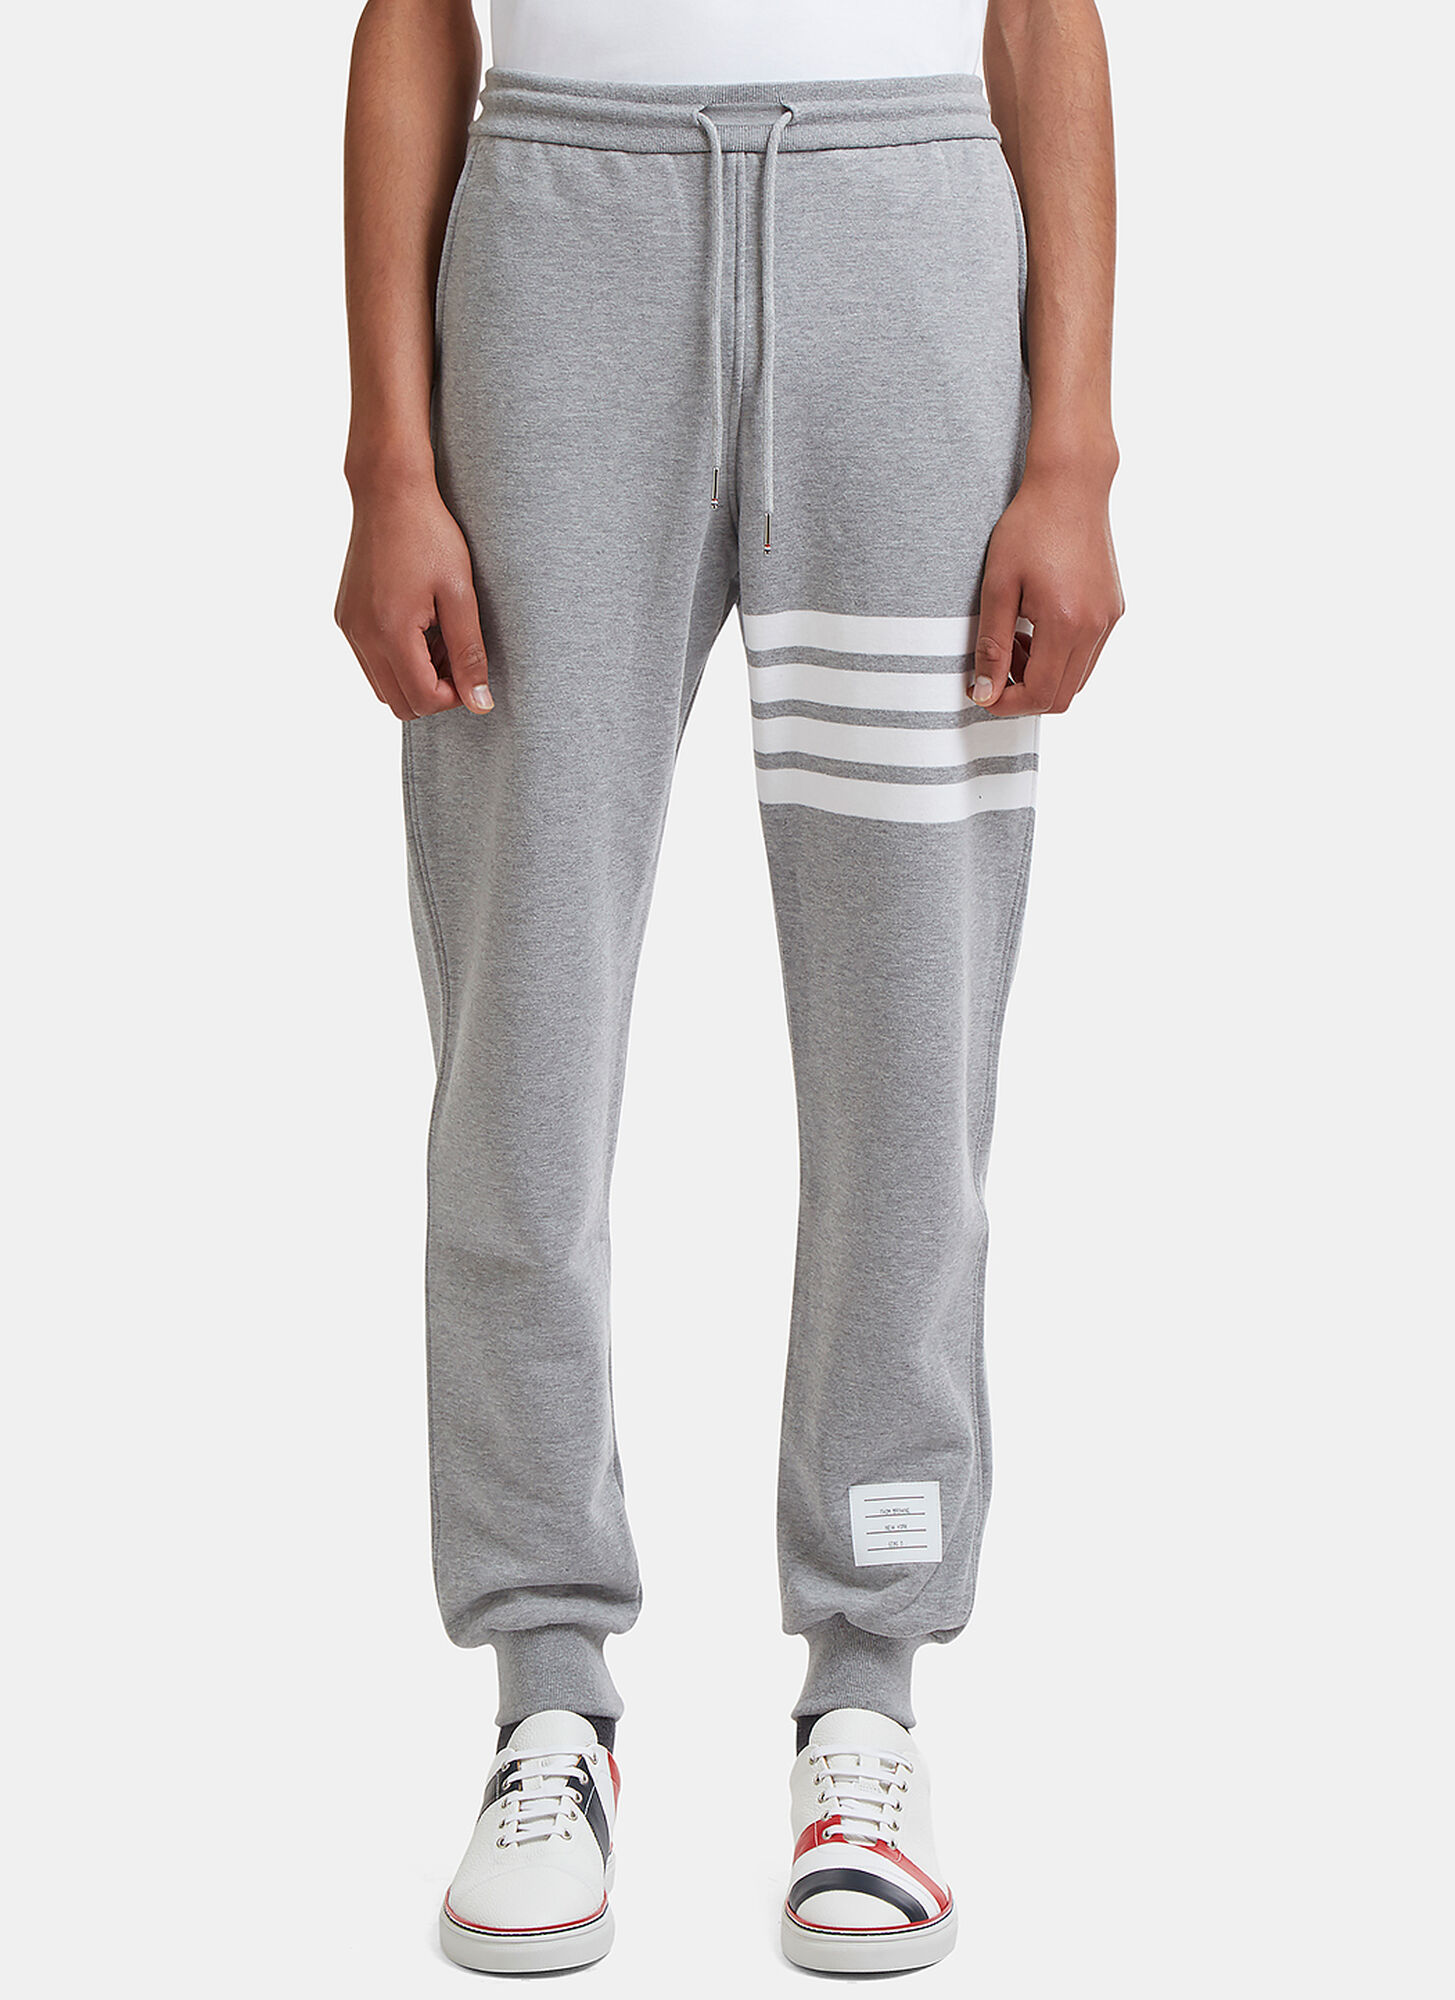 Thom Browne 4 Bar Jersey Track Pants in Grey size JPN - 3 | The Fashionisto